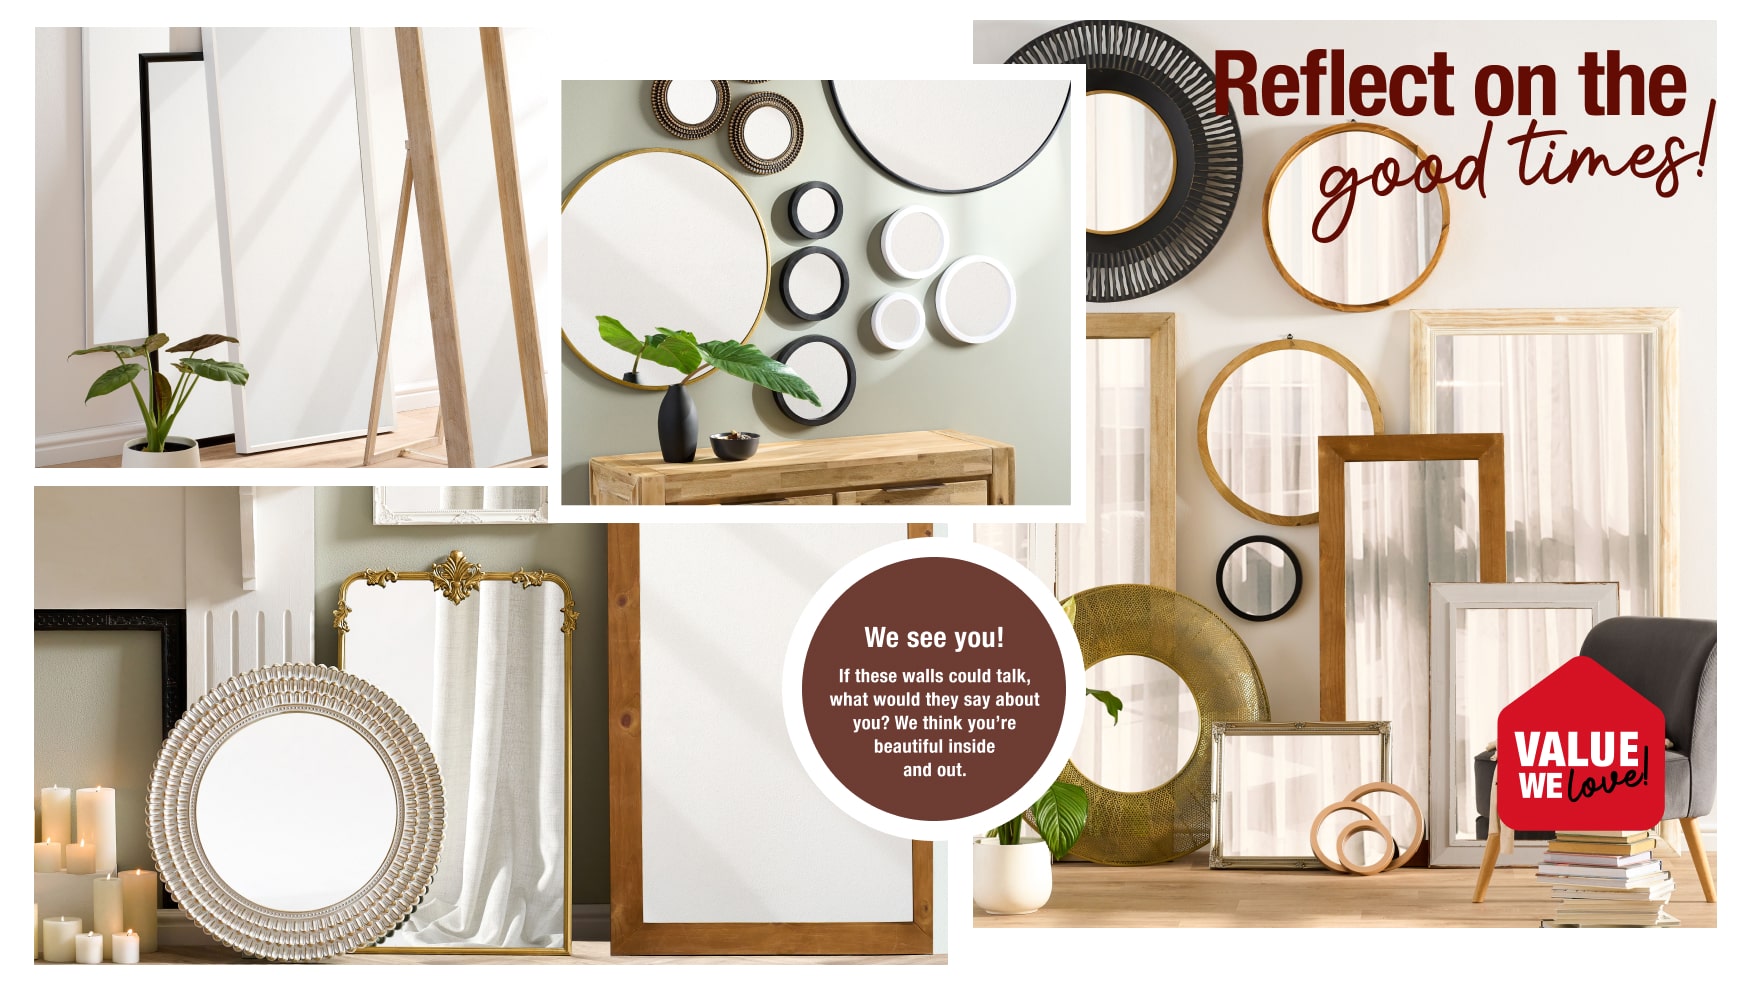 Reflect on the good times! Shop Mr price Homes mirror category